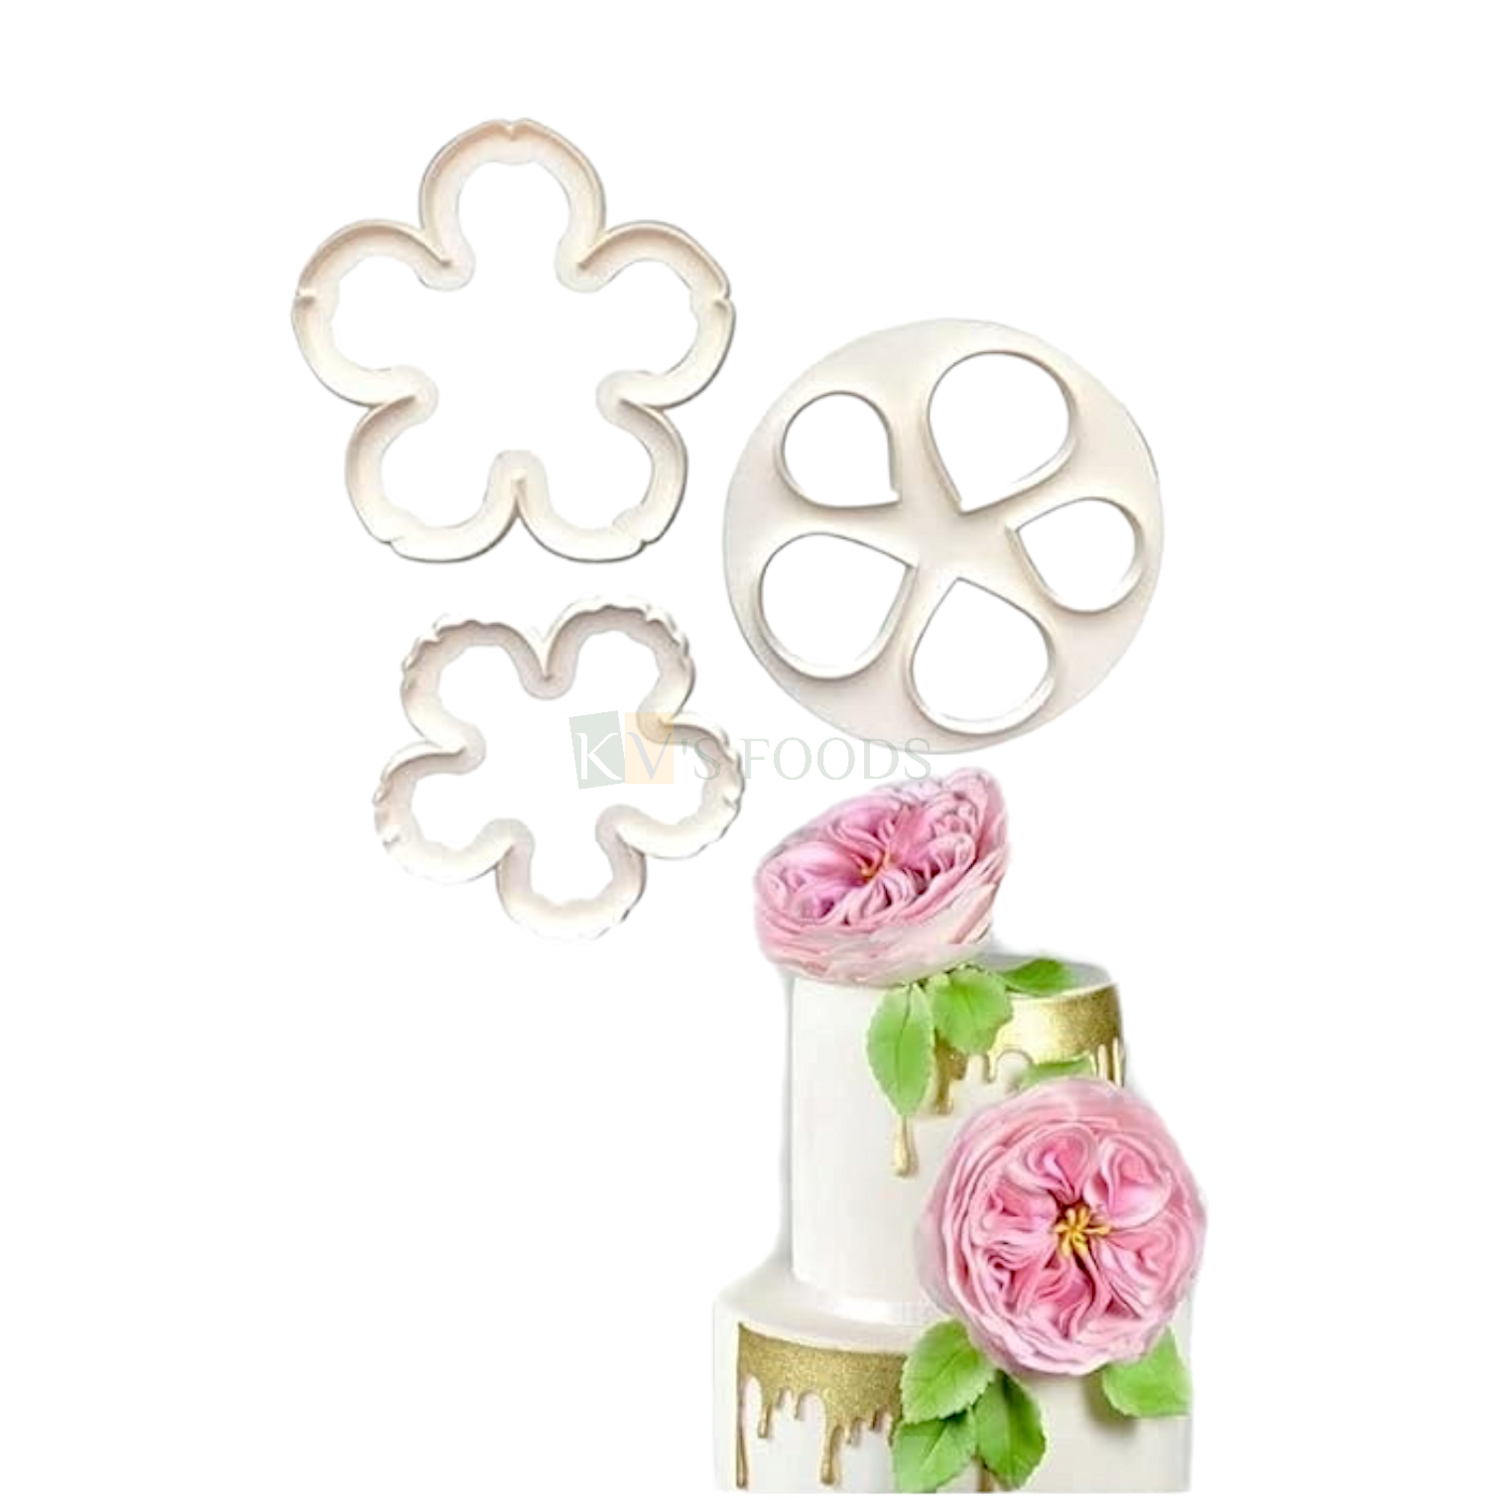 3 PCS White Different Sizes Rose Poeny Flower Petals Fondant Cutters, Molds, Embossing Presses Impression, Chocolates Pancake Cookies Birthday Wedding Anniversary Cakes Cupcake Decorations